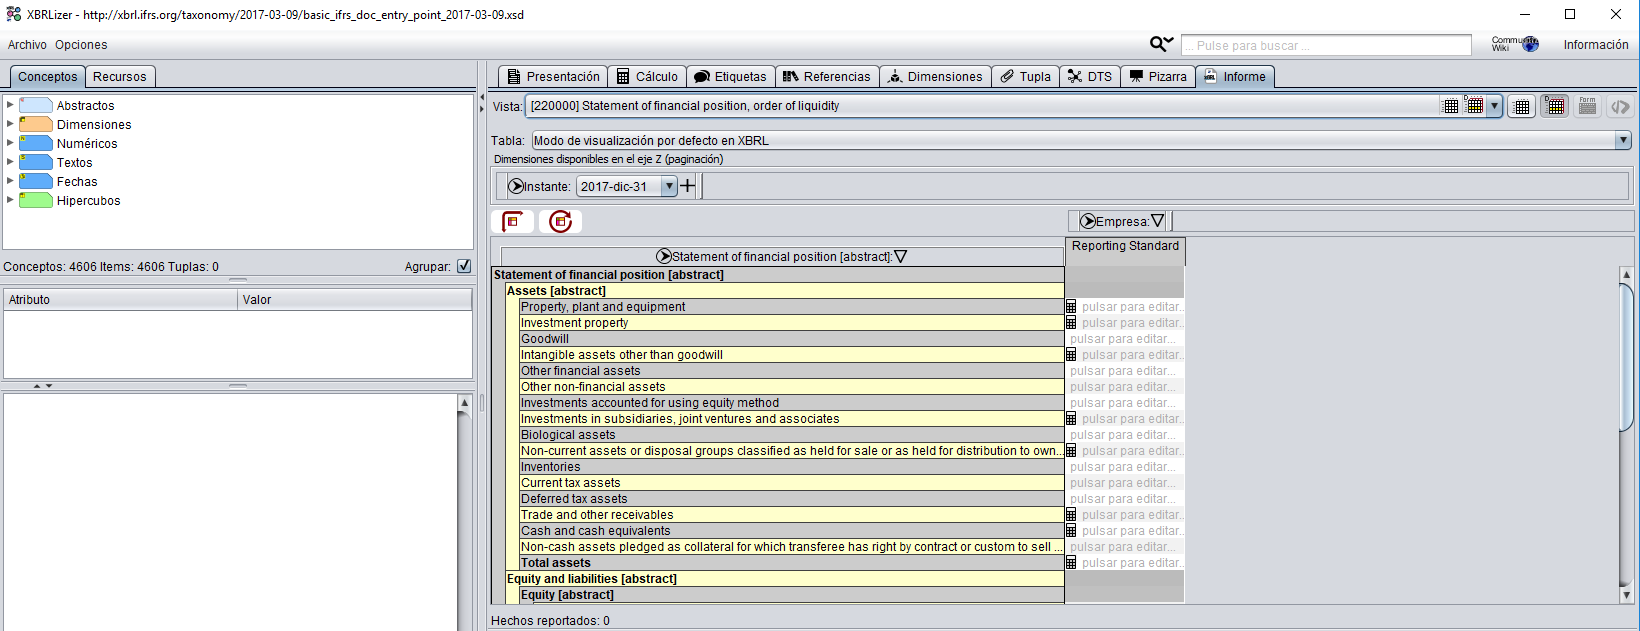 Image for download XBRL software suite page - Sample Screenshot RS XBRL software suite - XBRLizer